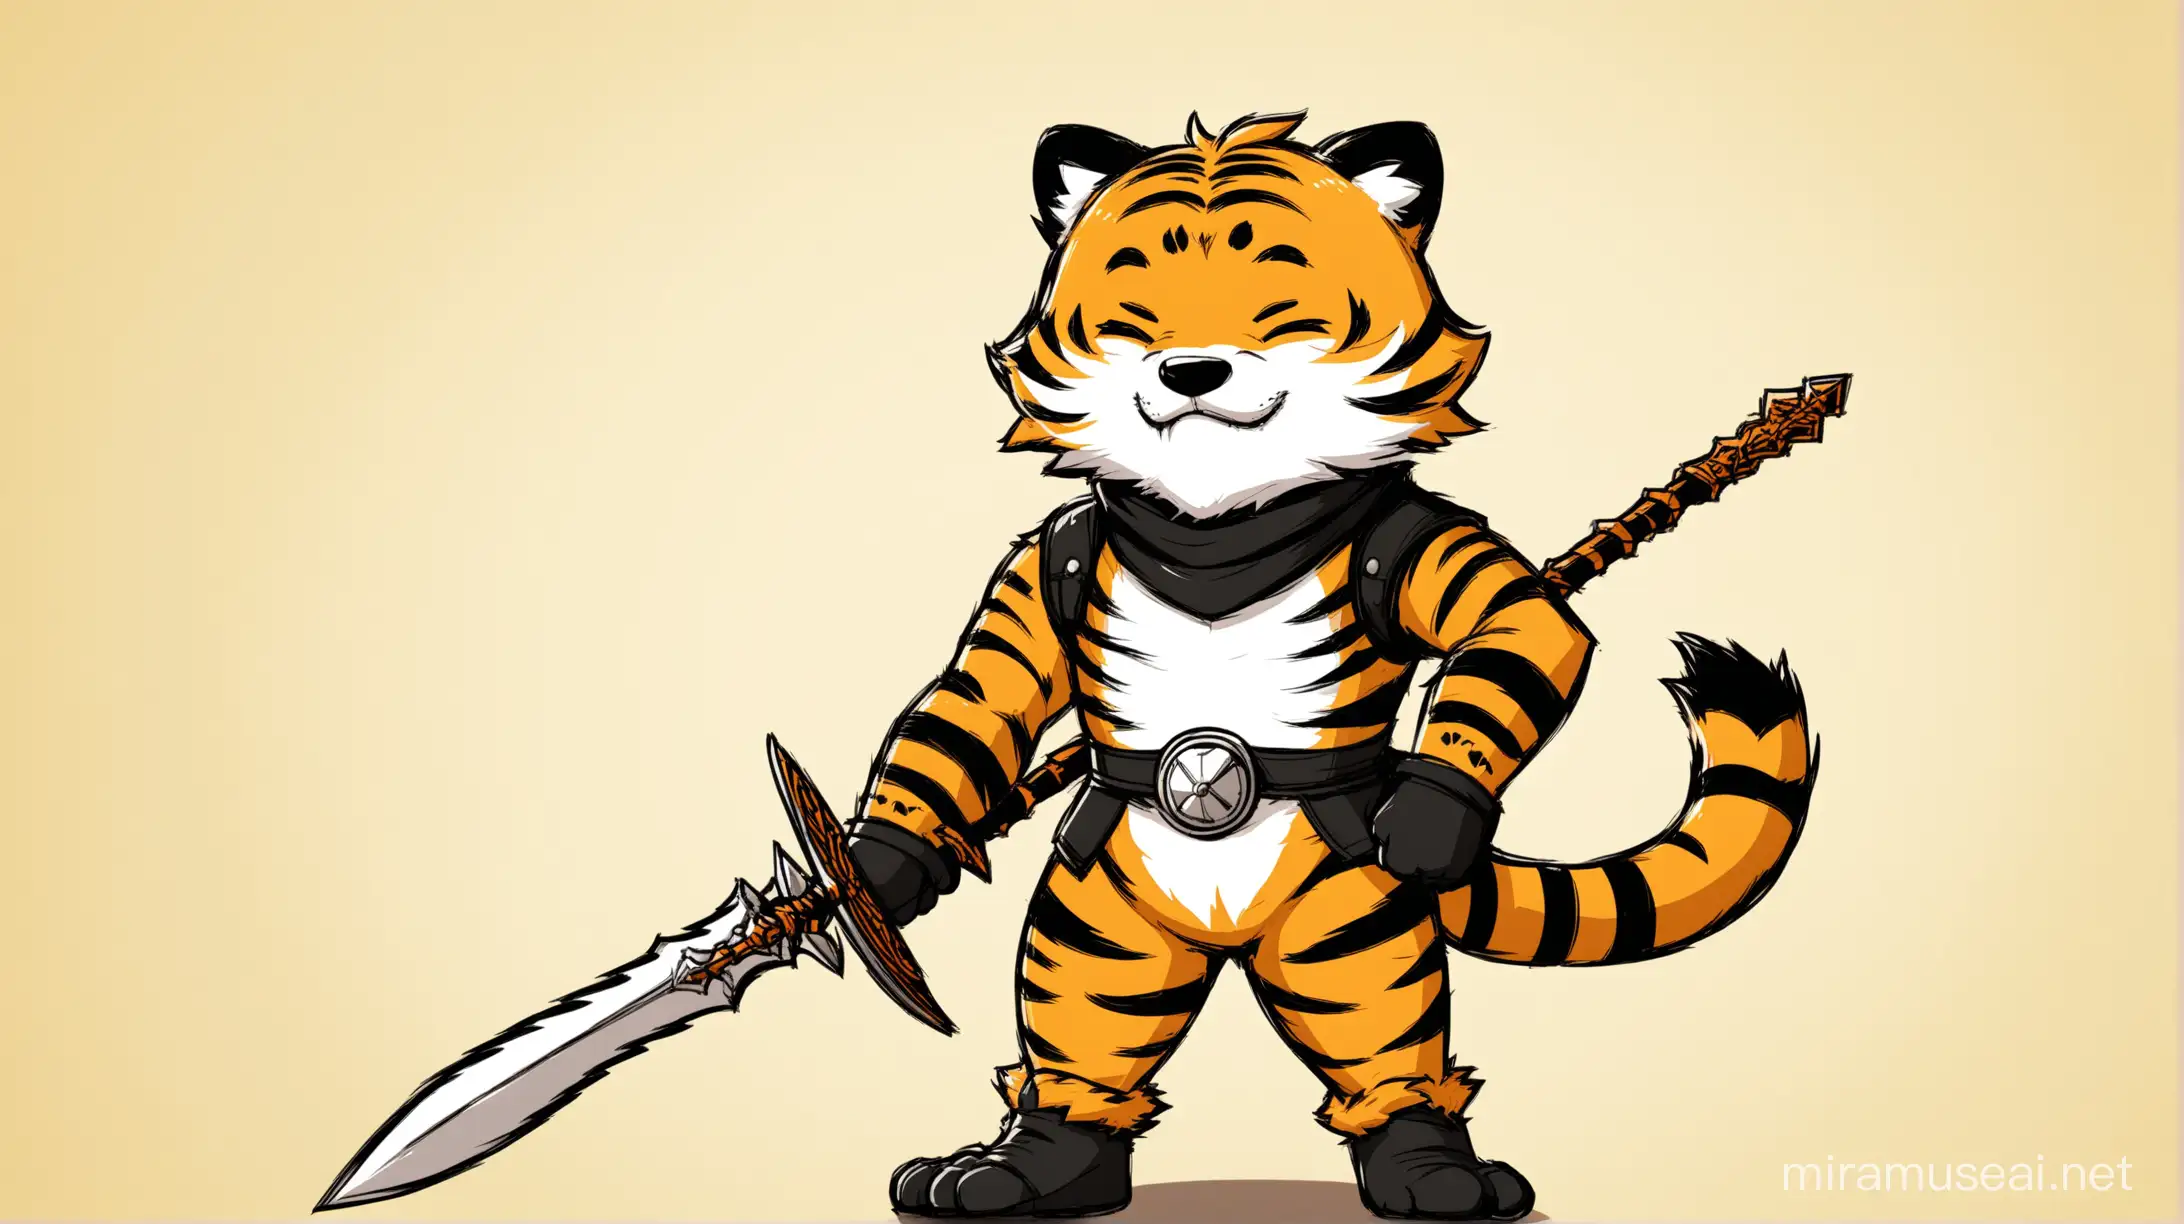 Hobbes from RWBY Dynamic Character Illustration